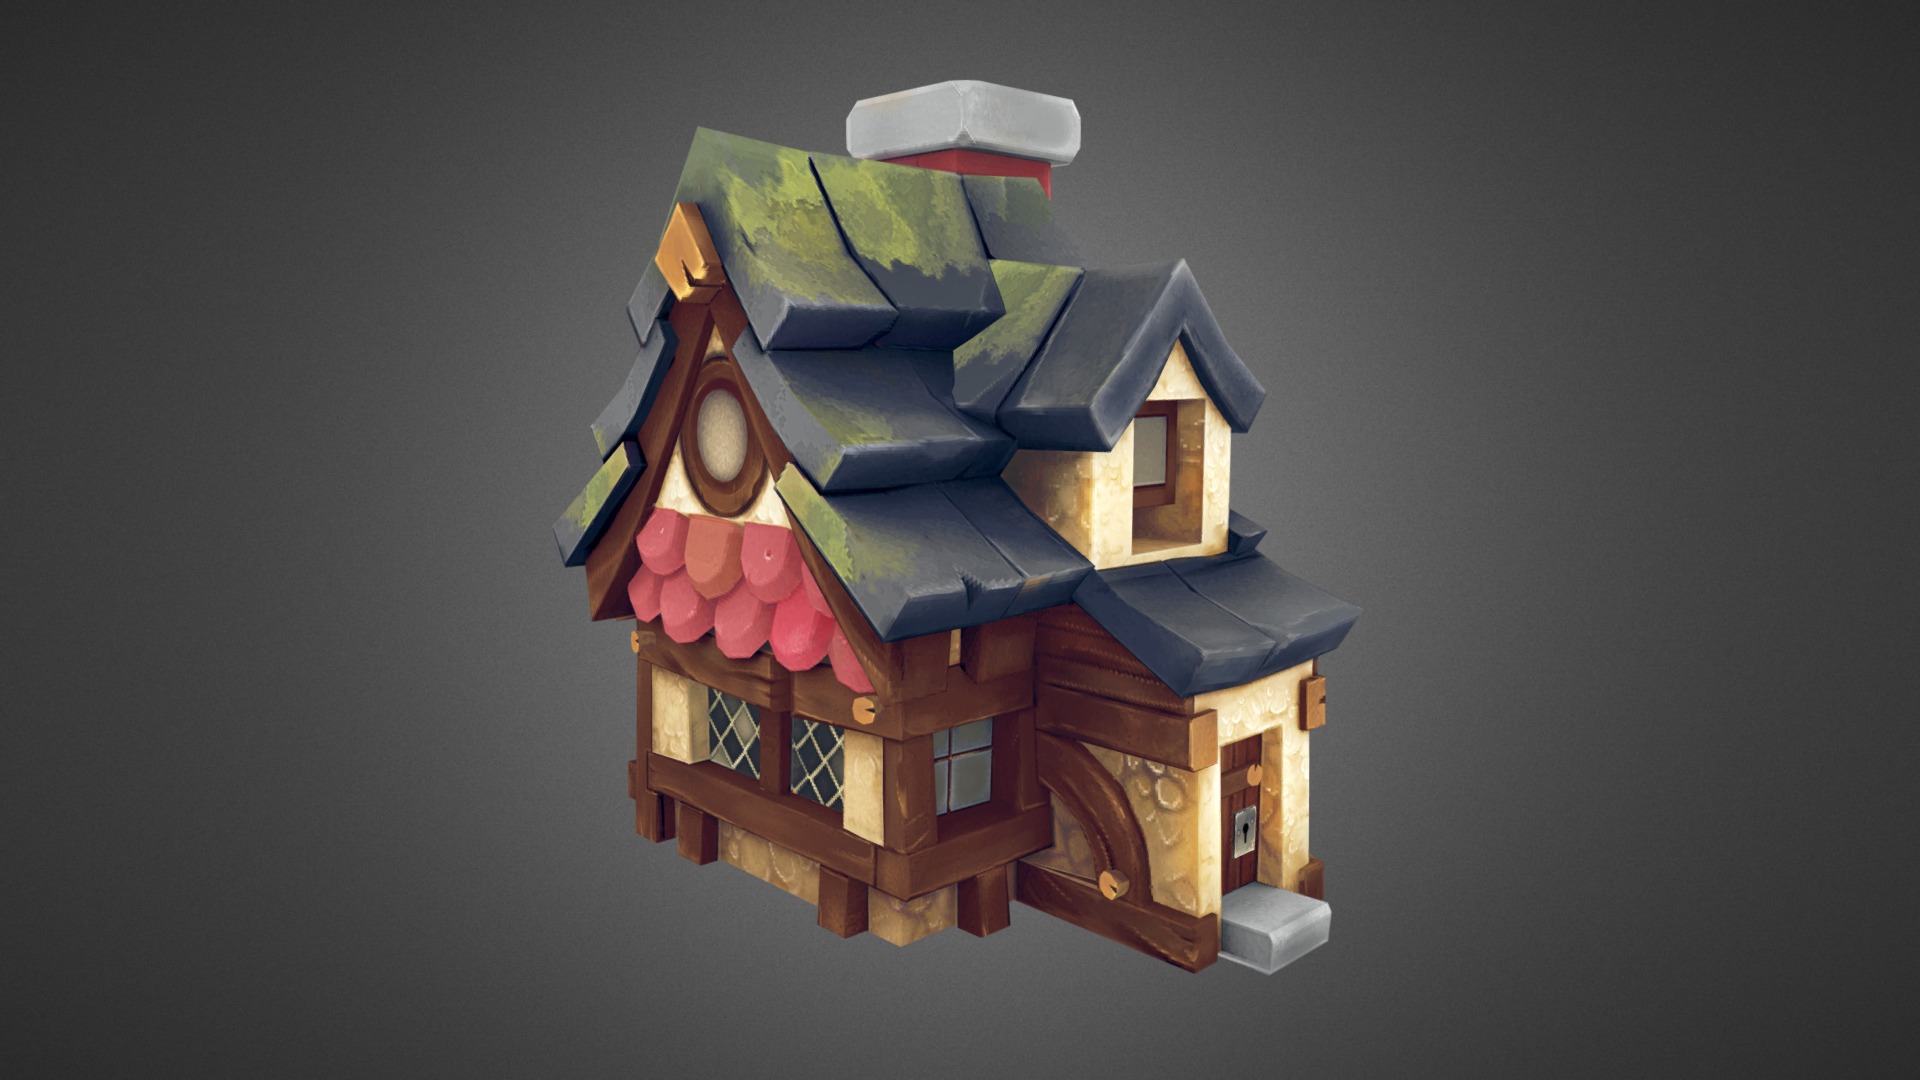 3D model LowPoly_House - This is a 3D model of the LowPoly_House. The 3D model is about a toy house with a light on top.